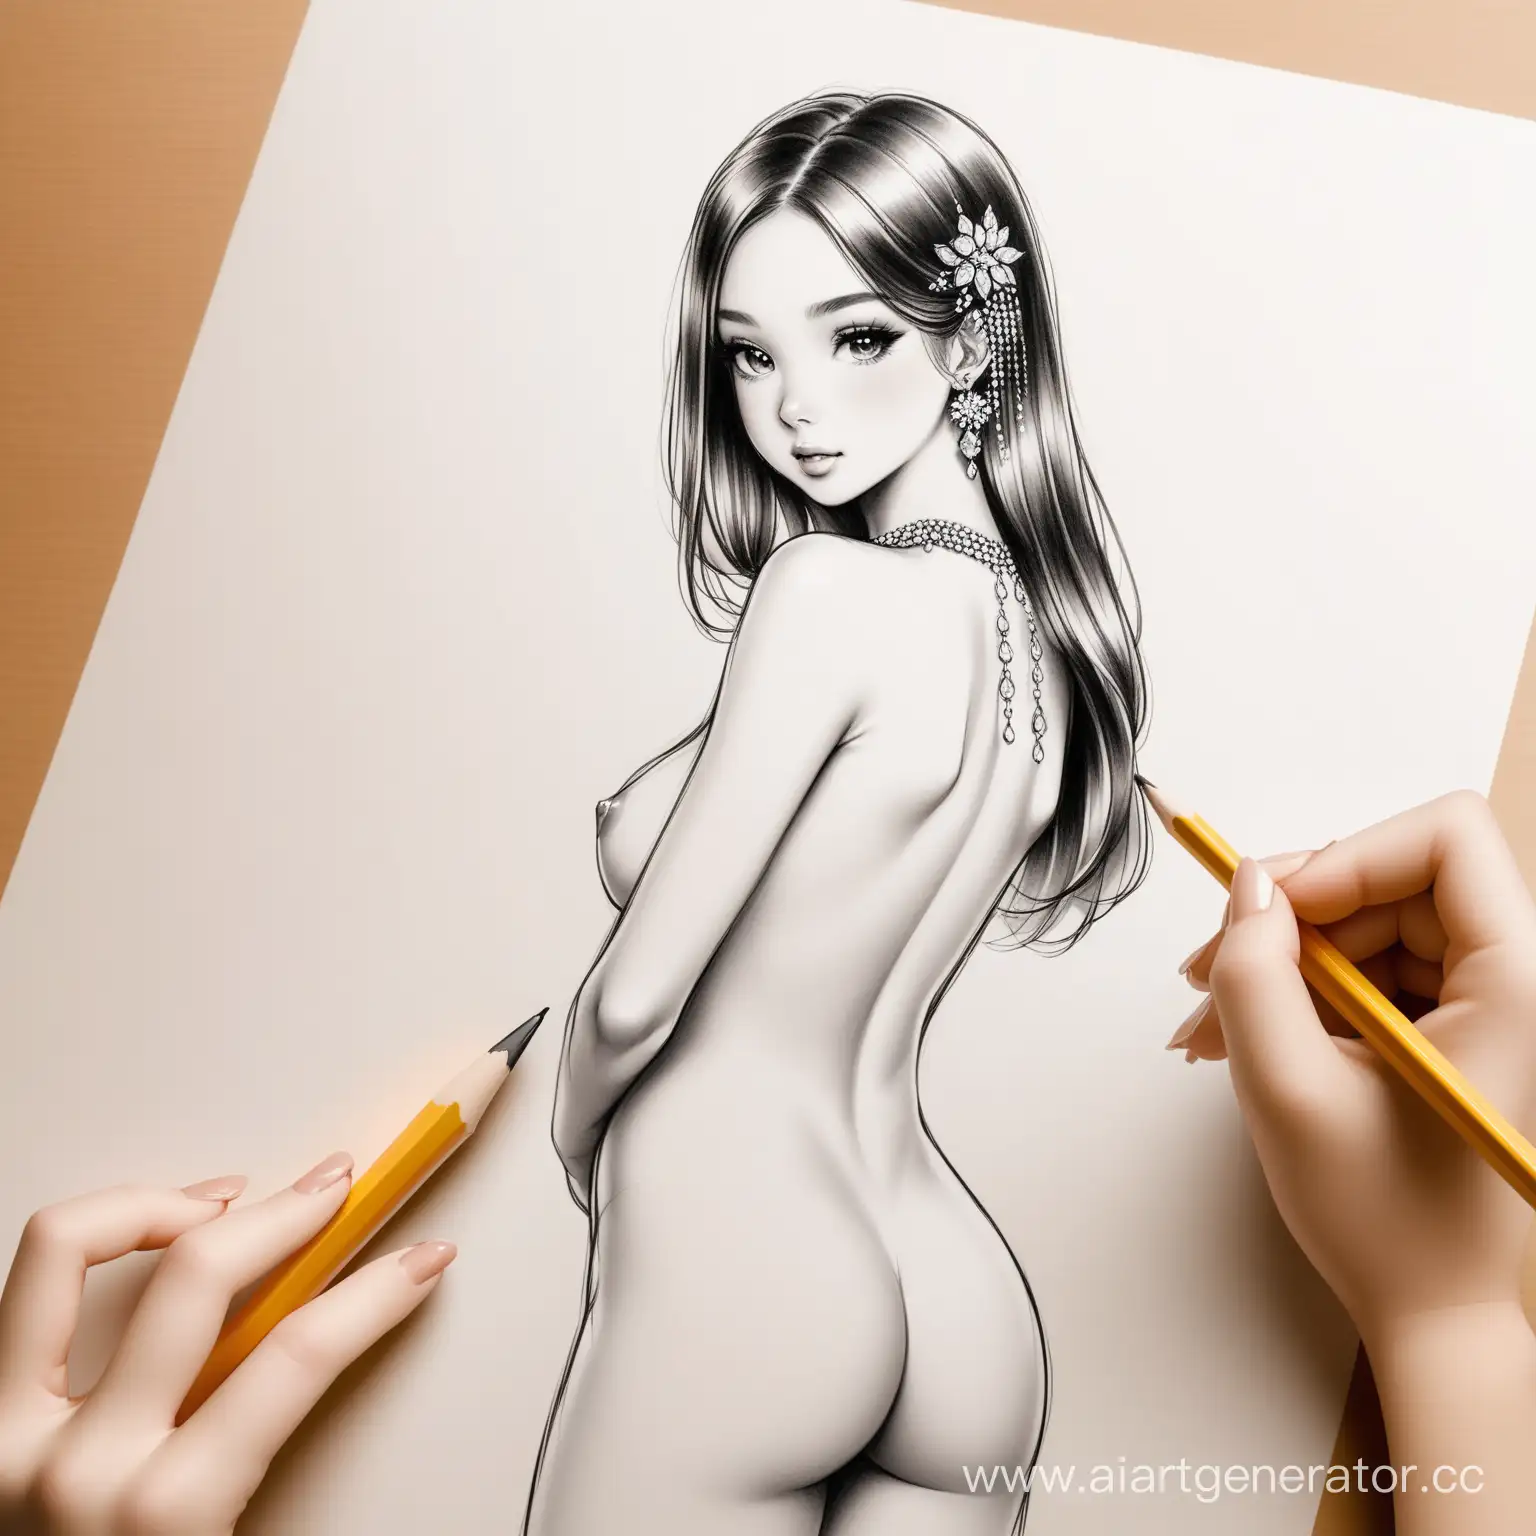 Realistic-Pencil-Drawing-of-a-Nude-Woman-Adorned-with-Exquisite-Jewelry